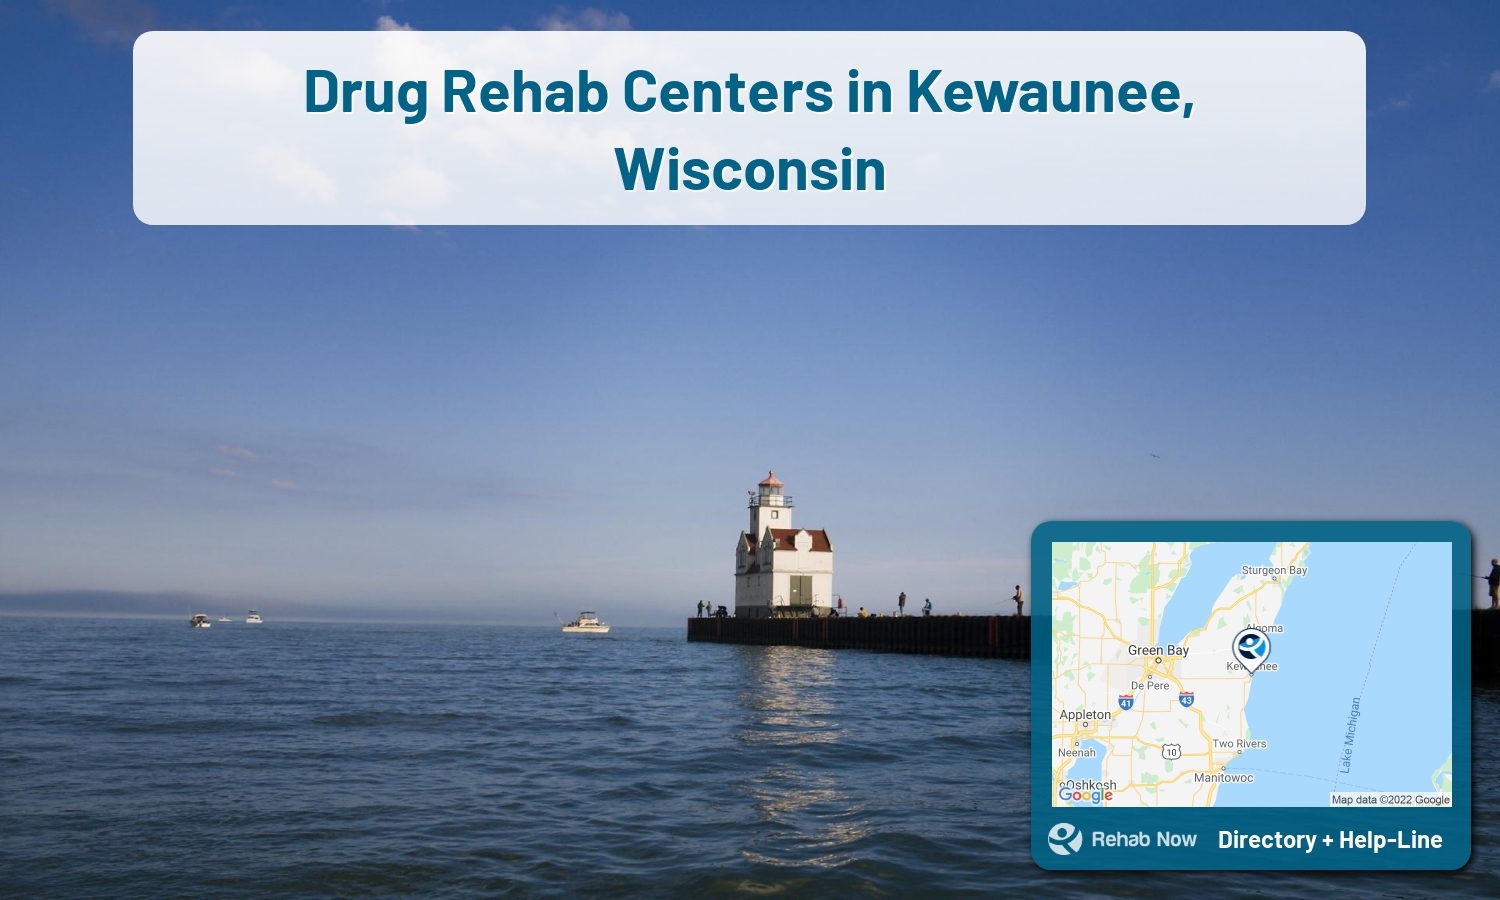 Kewaunee, WI Treatment Centers. Find drug rehab in Kewaunee, Wisconsin, or detox and treatment programs. Get the right help now!